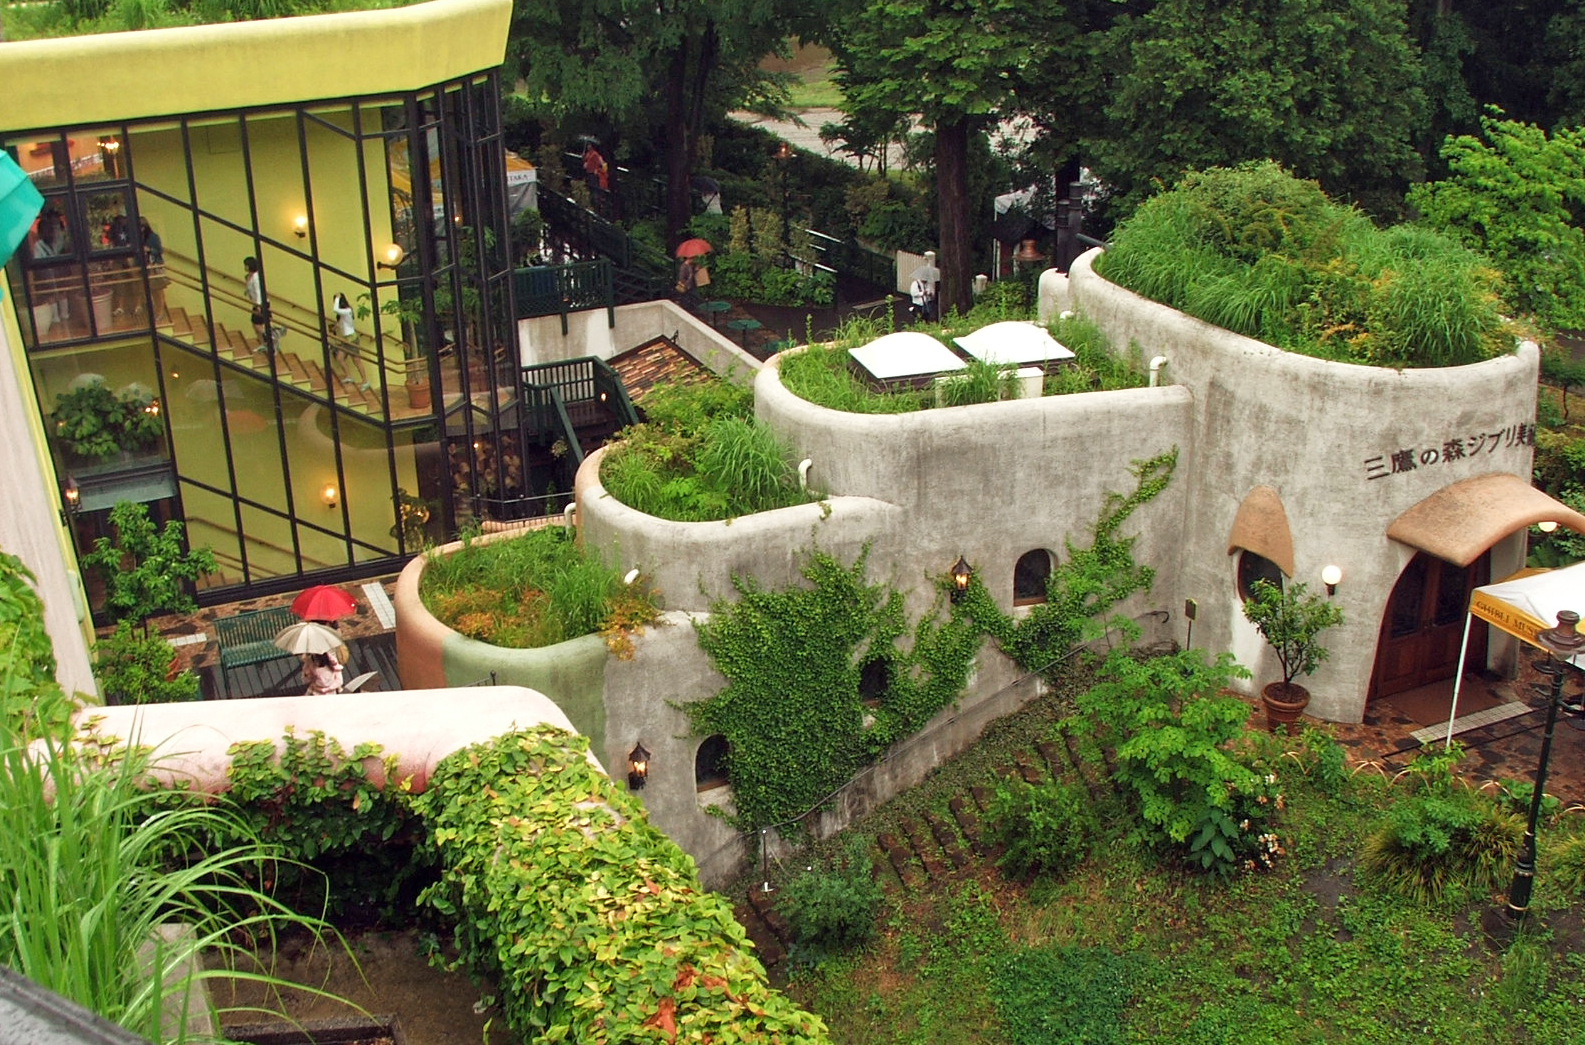 Studio Ghibli Museum - quirky and unusual things to do in Tokyo